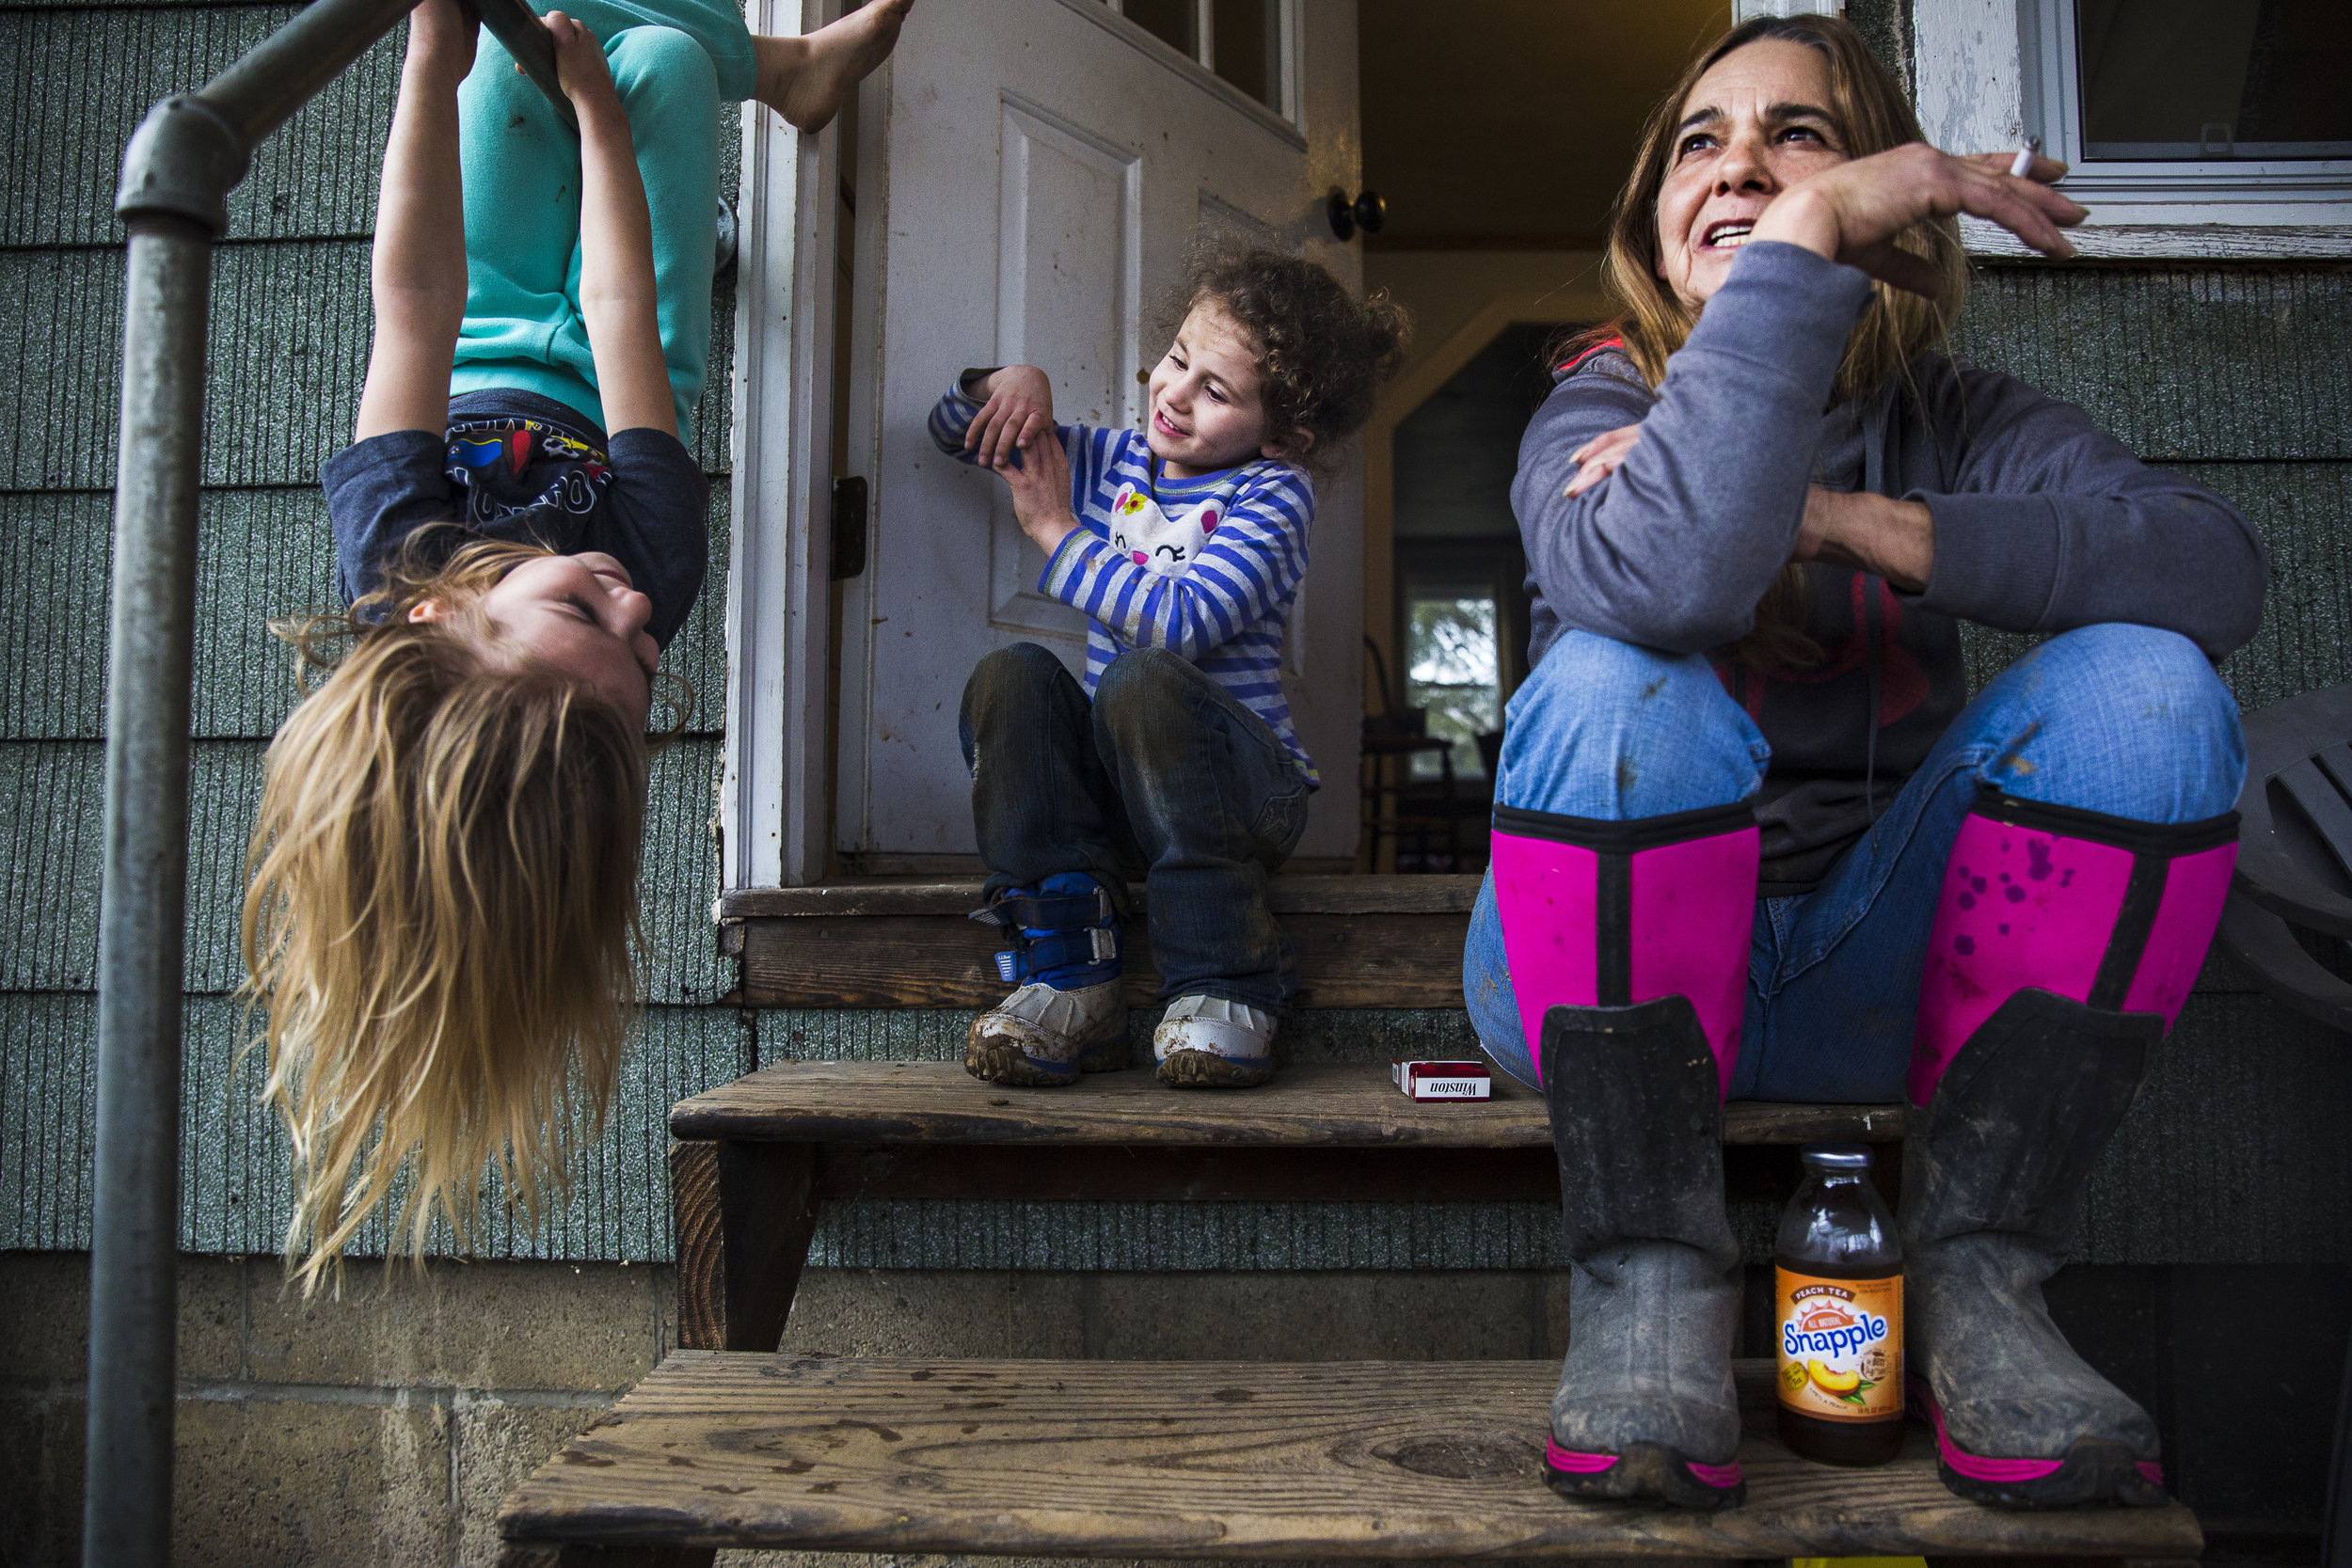  Mary Jonas enjoys an evening on her stoop with granddaughter Emily (5, far left) and friend Emma (4). Emma and her sister used to rent the house next door to the Jonas’ with their mother but recently moved to Belpre. The two sisters, along with the 